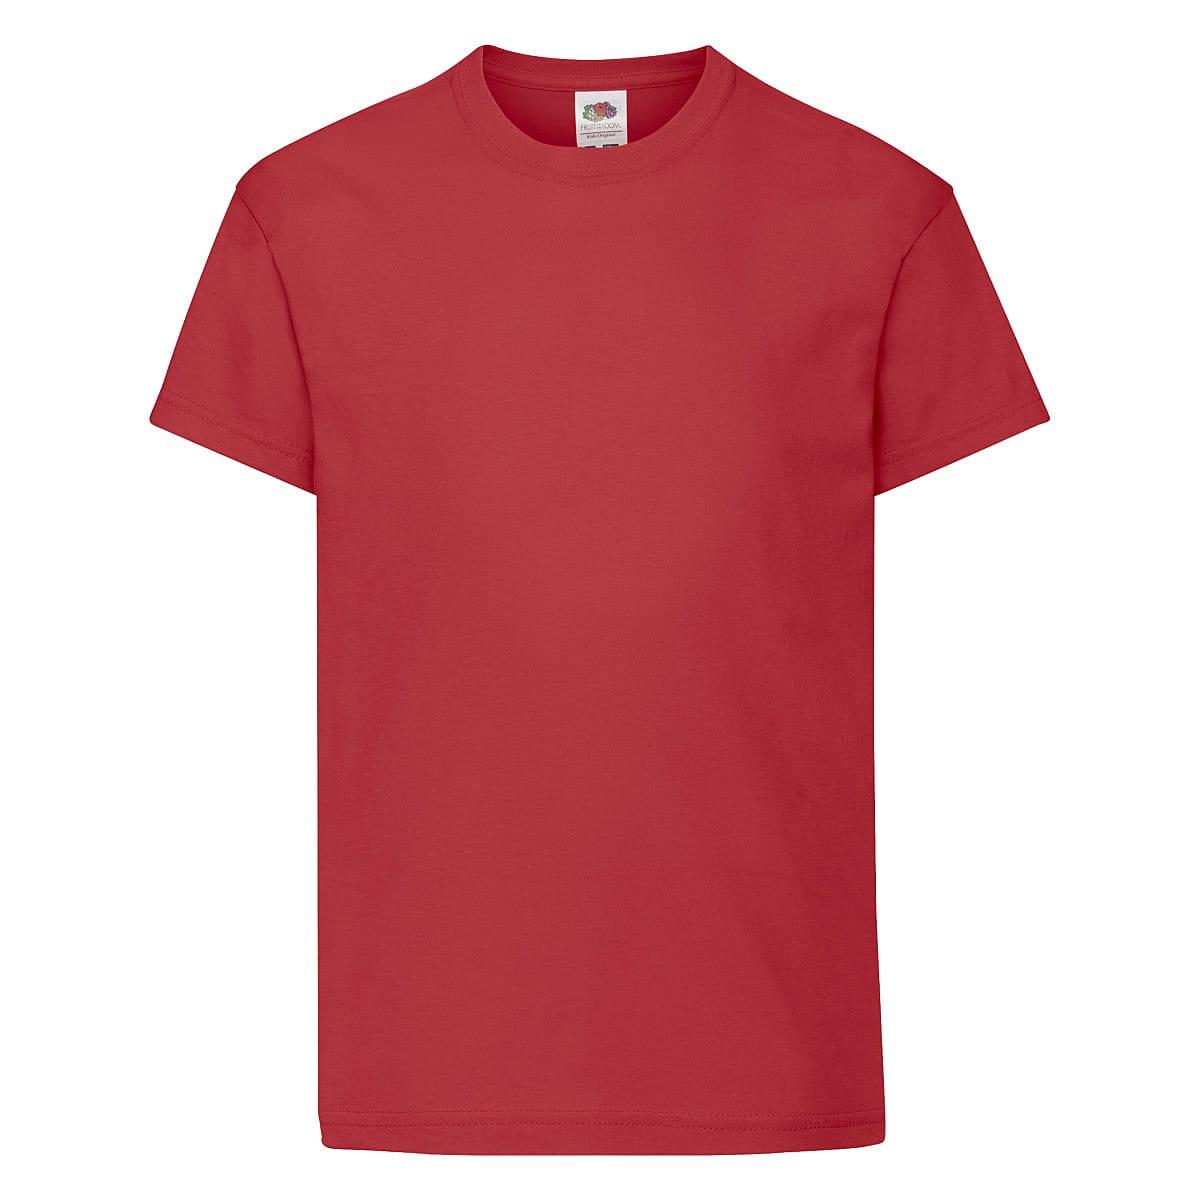 Fruit Of The Loom Kids Original T-Shirt in Red (Product Code: 61019)